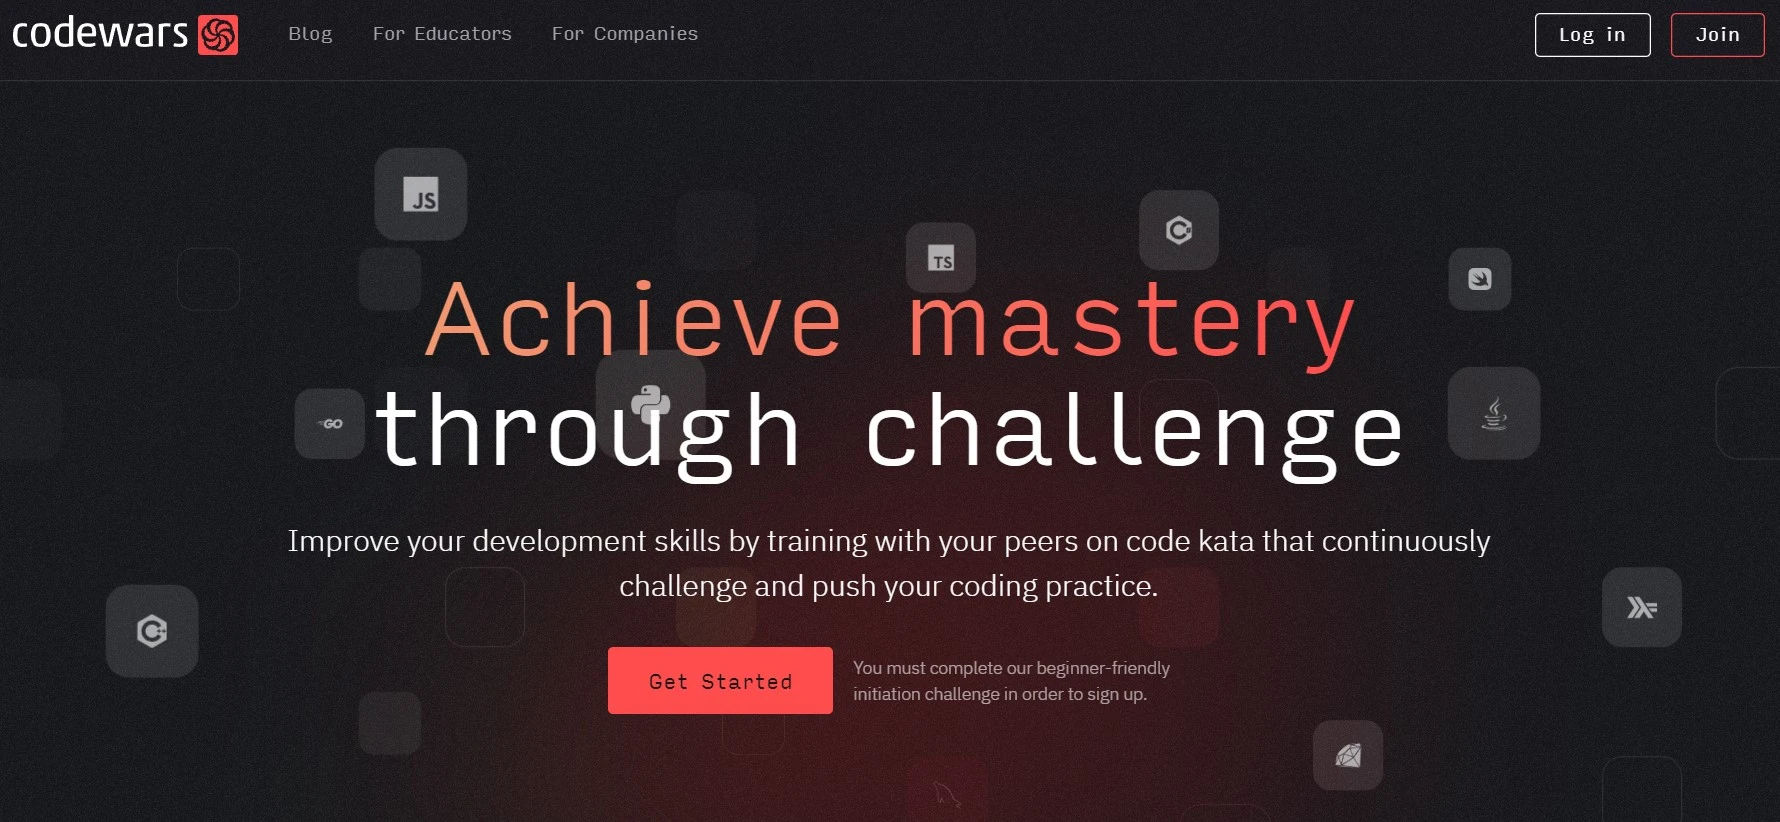 Codewars pushes your coding practice